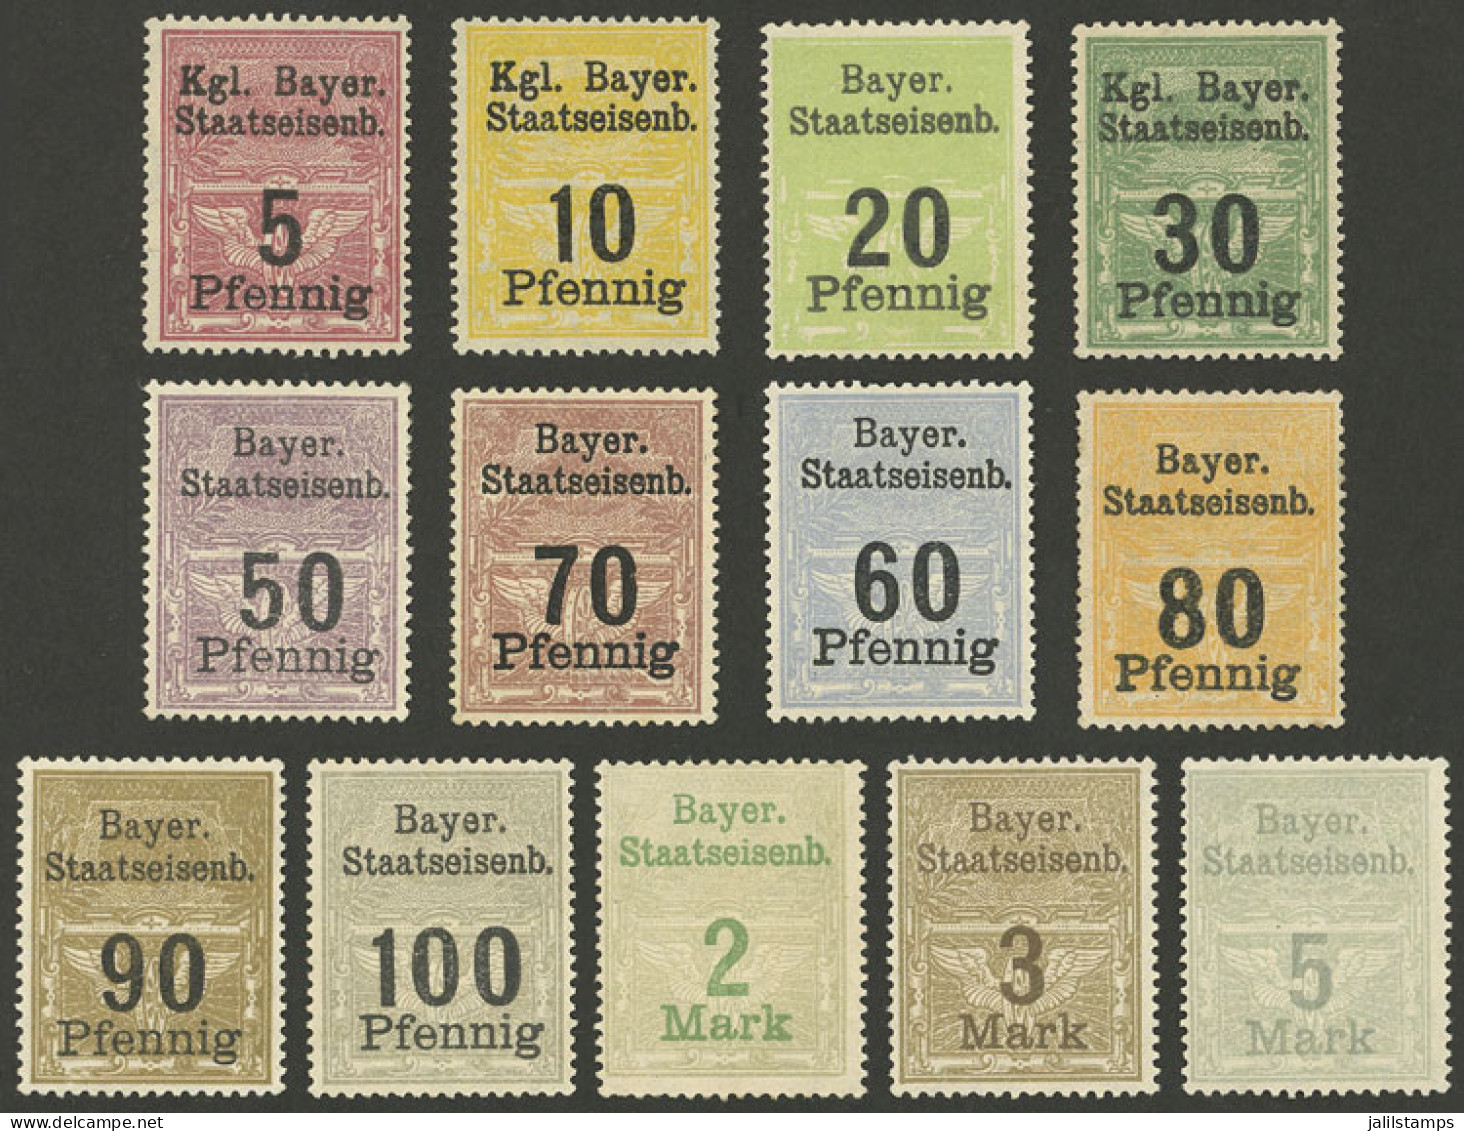 GERMANY: Attractive Group Of Railway Cinderellas, Mint Without Gum, VF Quality! - Cinderellas